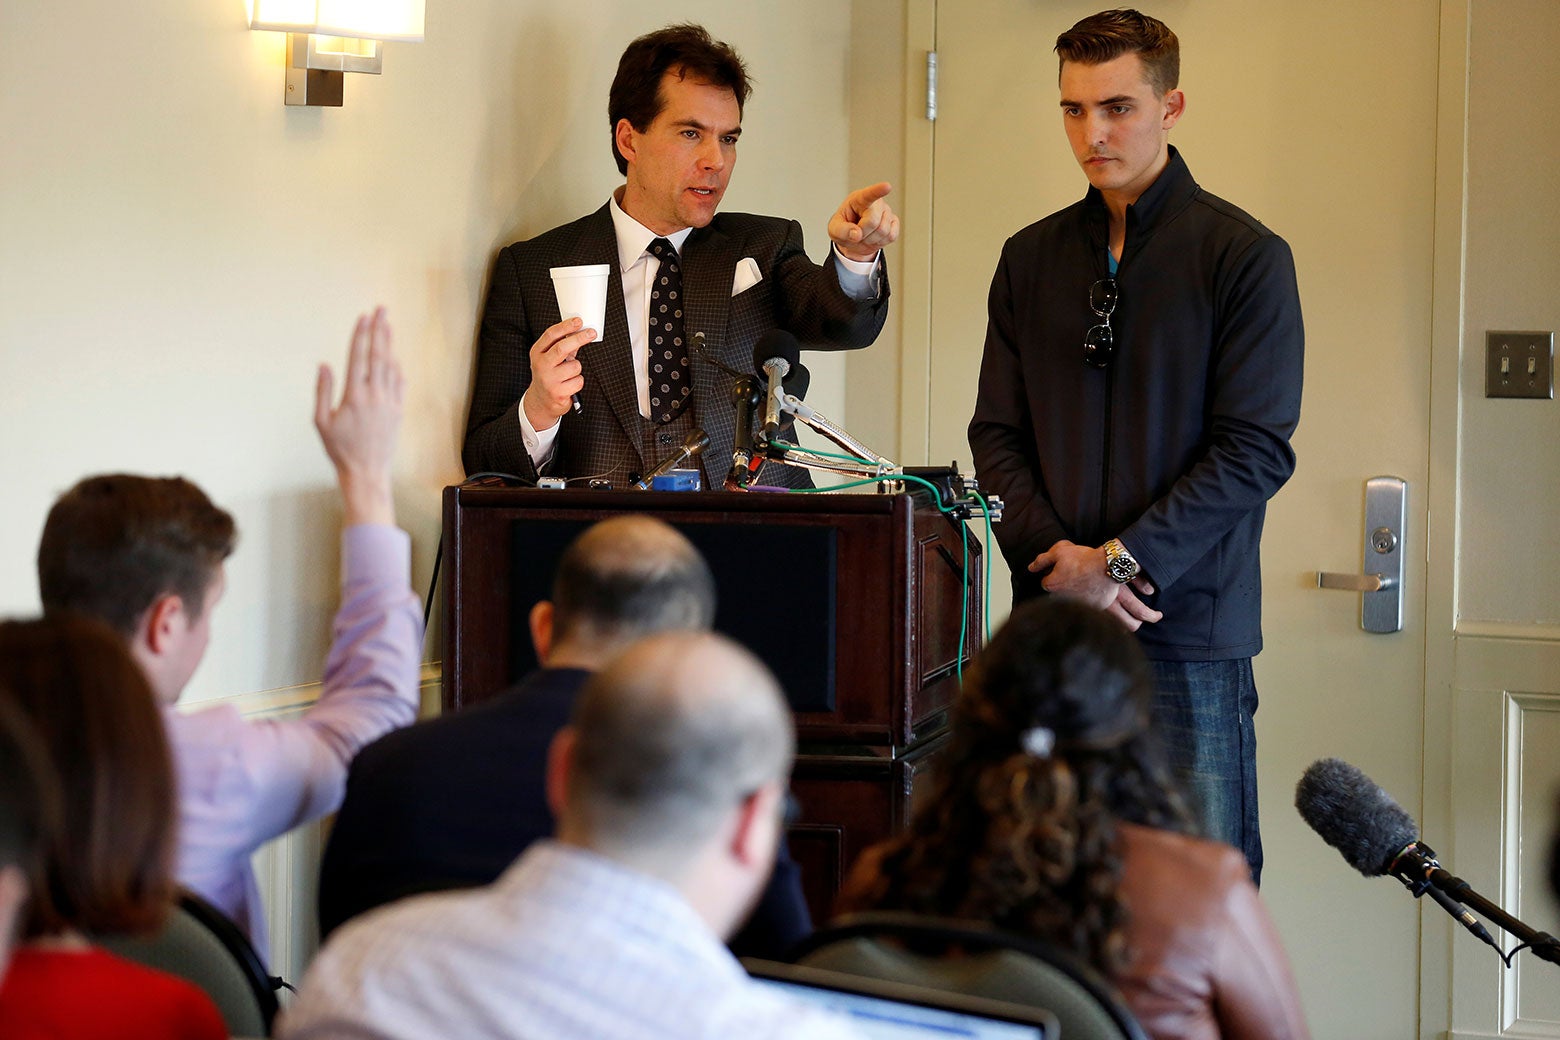 Jack Burkman and Jacob Wohl at a news conference